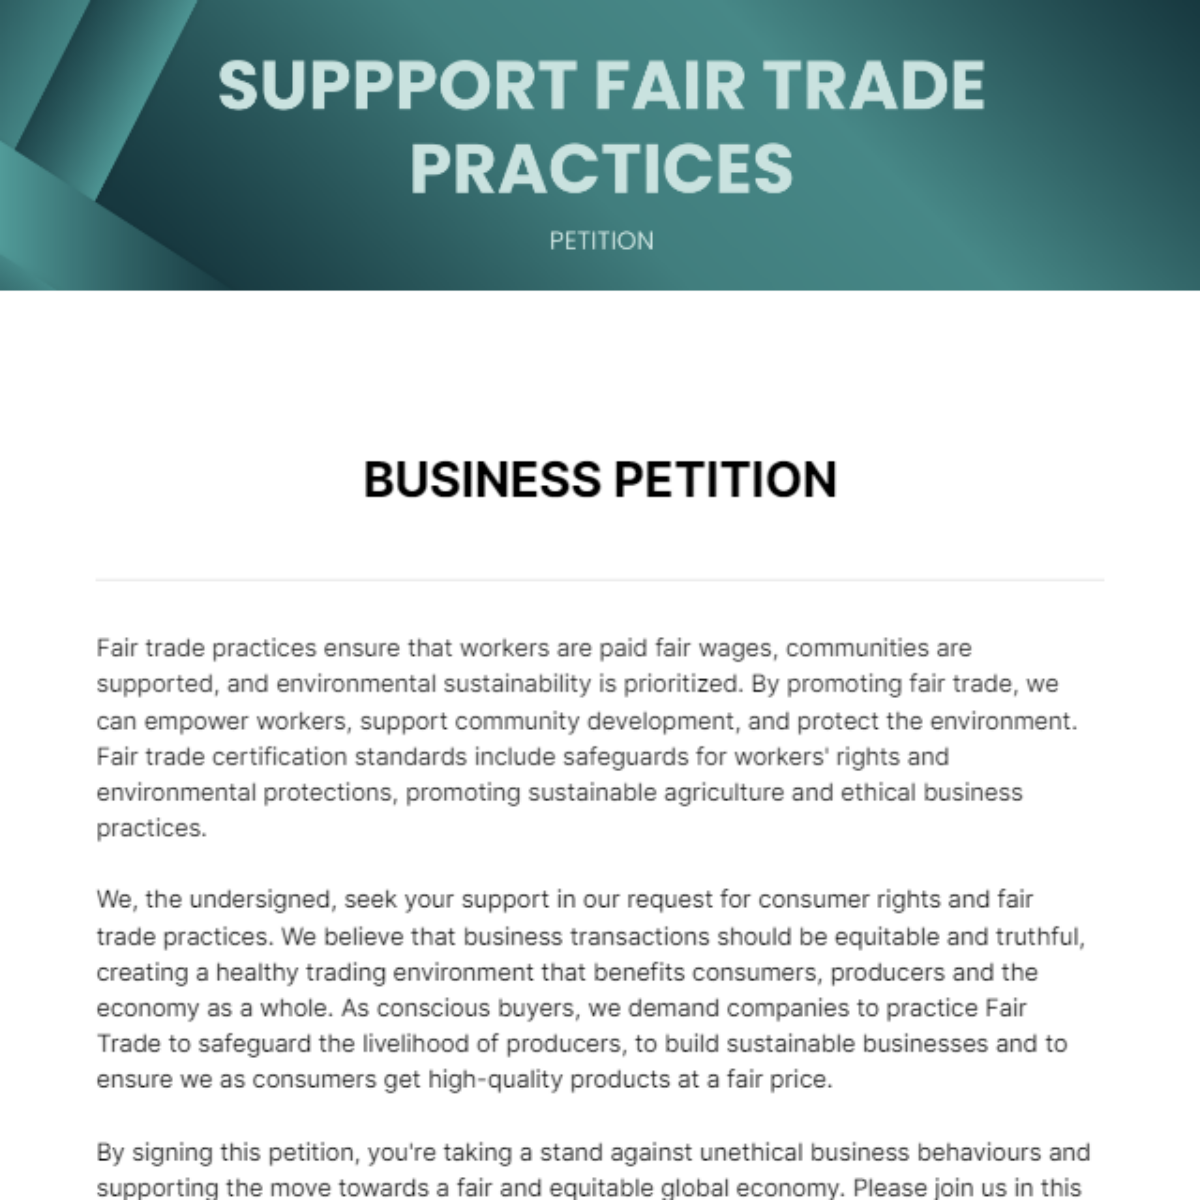 Business Petition Template